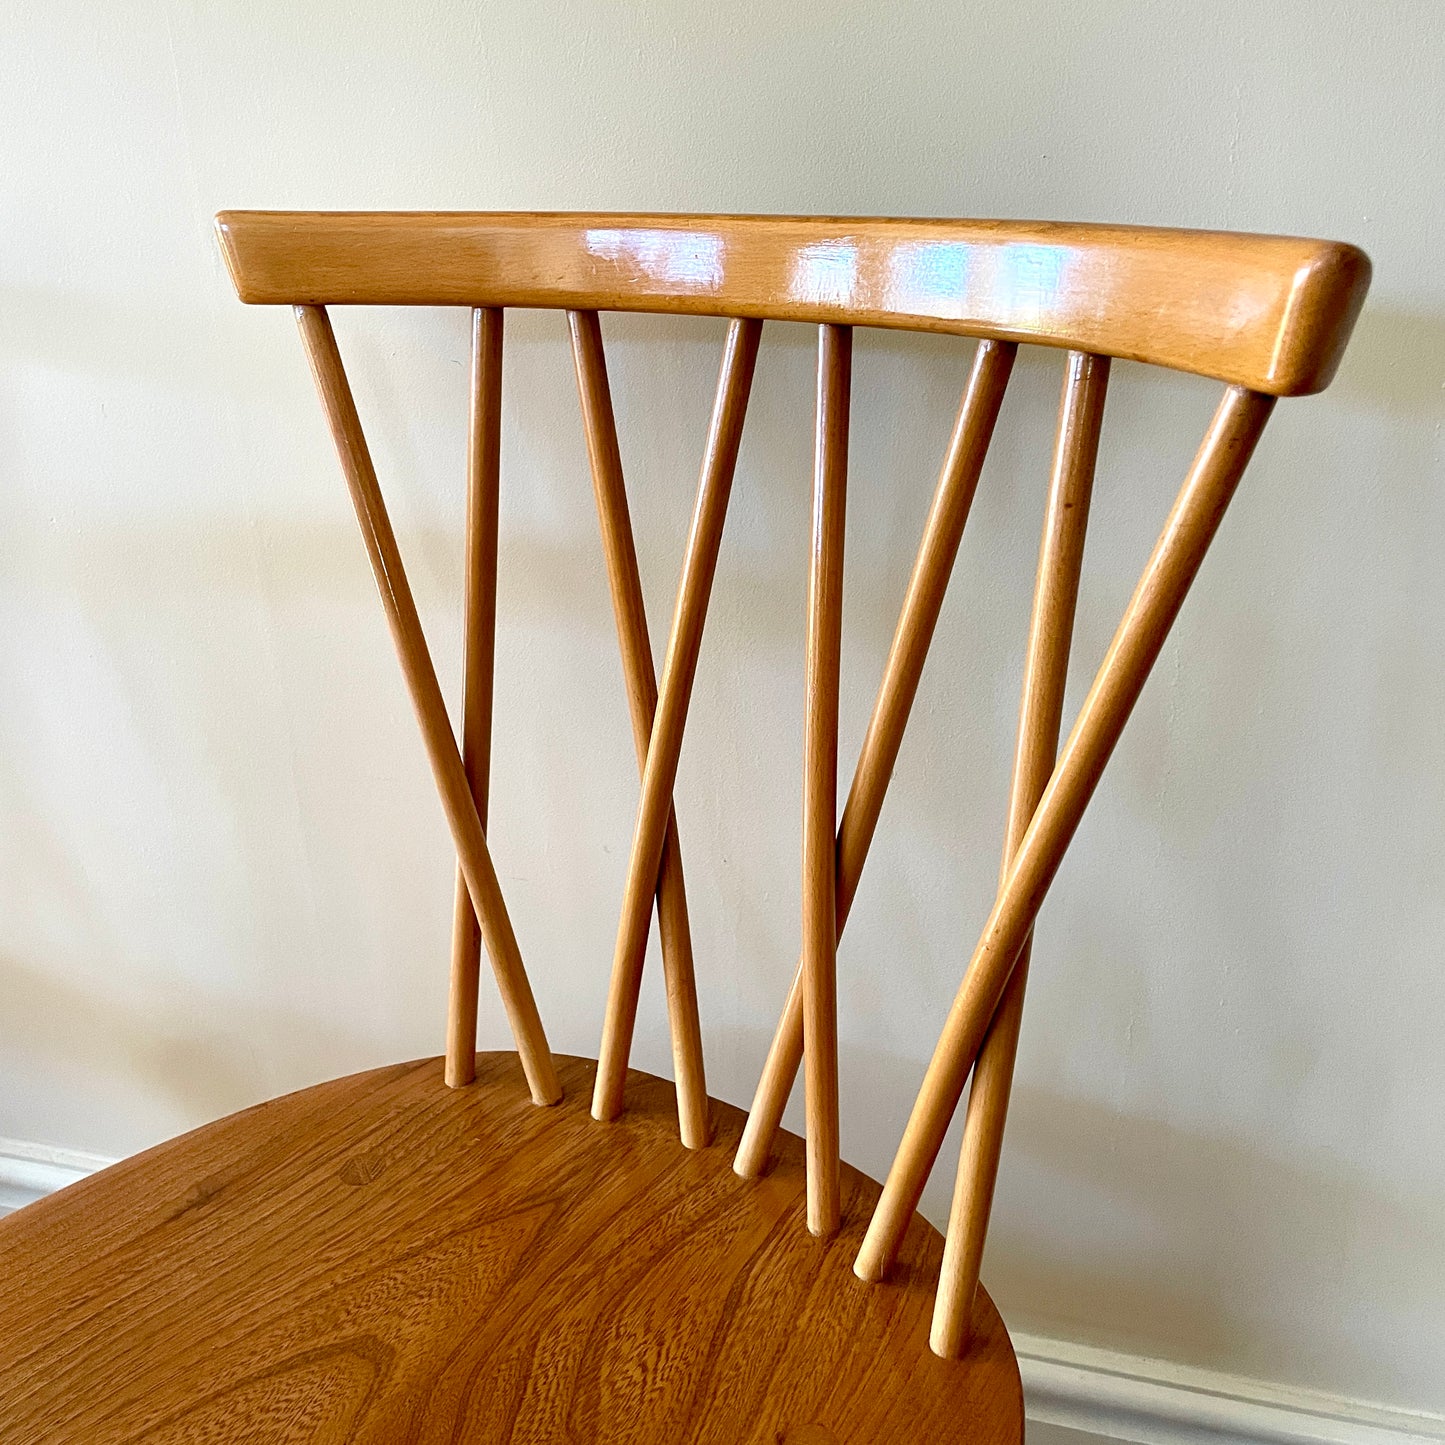 4 x Ercol Windsor Candlestick Dining chairs